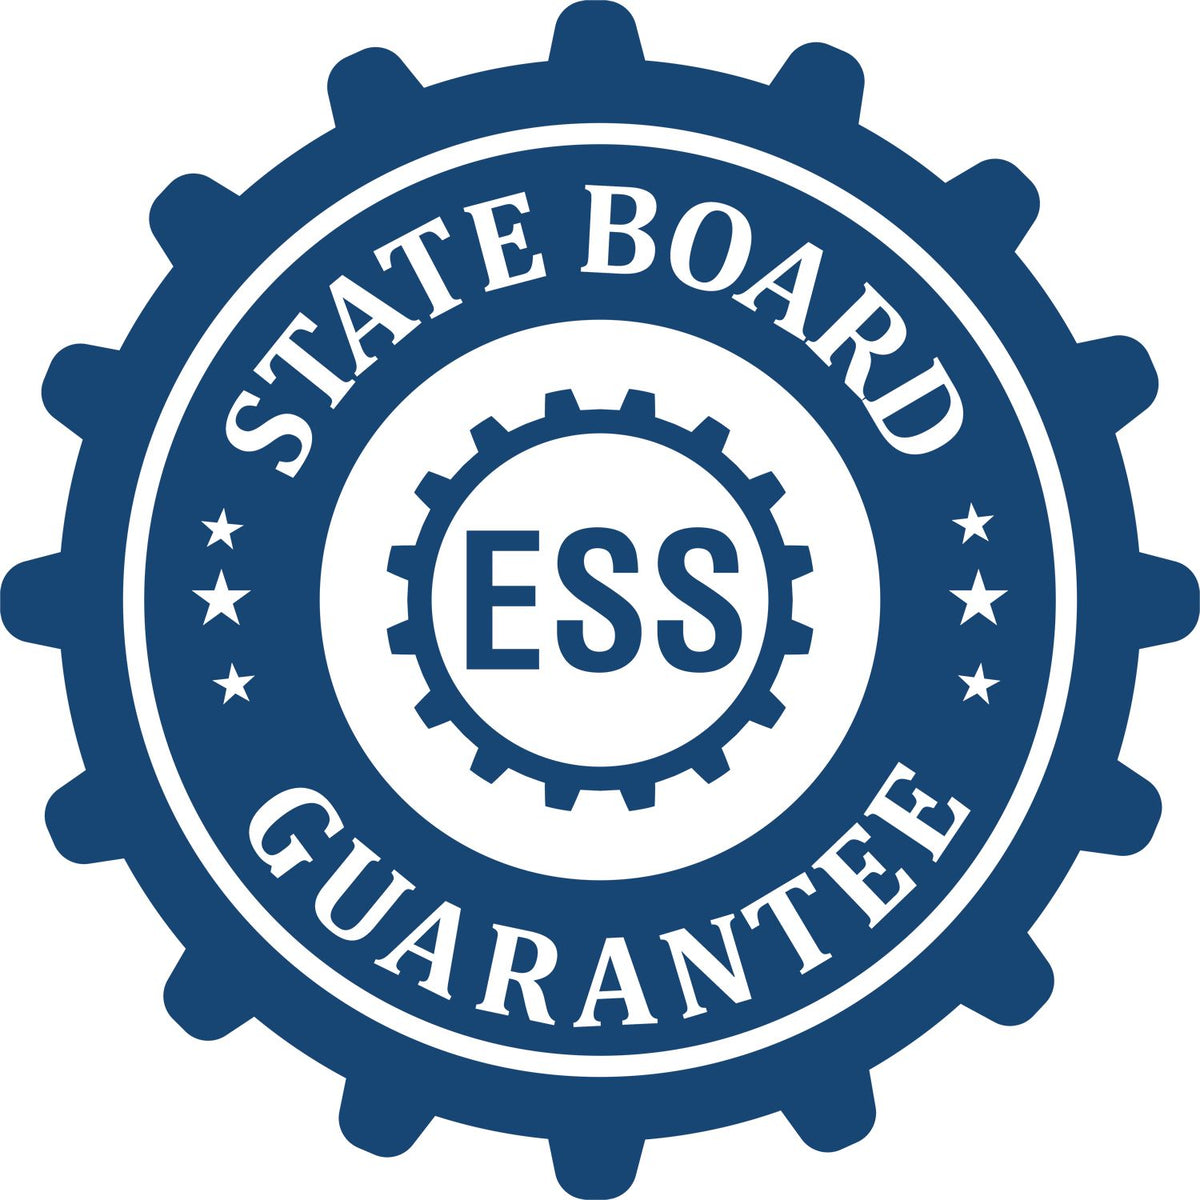 An emblem in a gear shape illustrating a state board guarantee for the Soft Nebraska Professional Engineer Seal product.